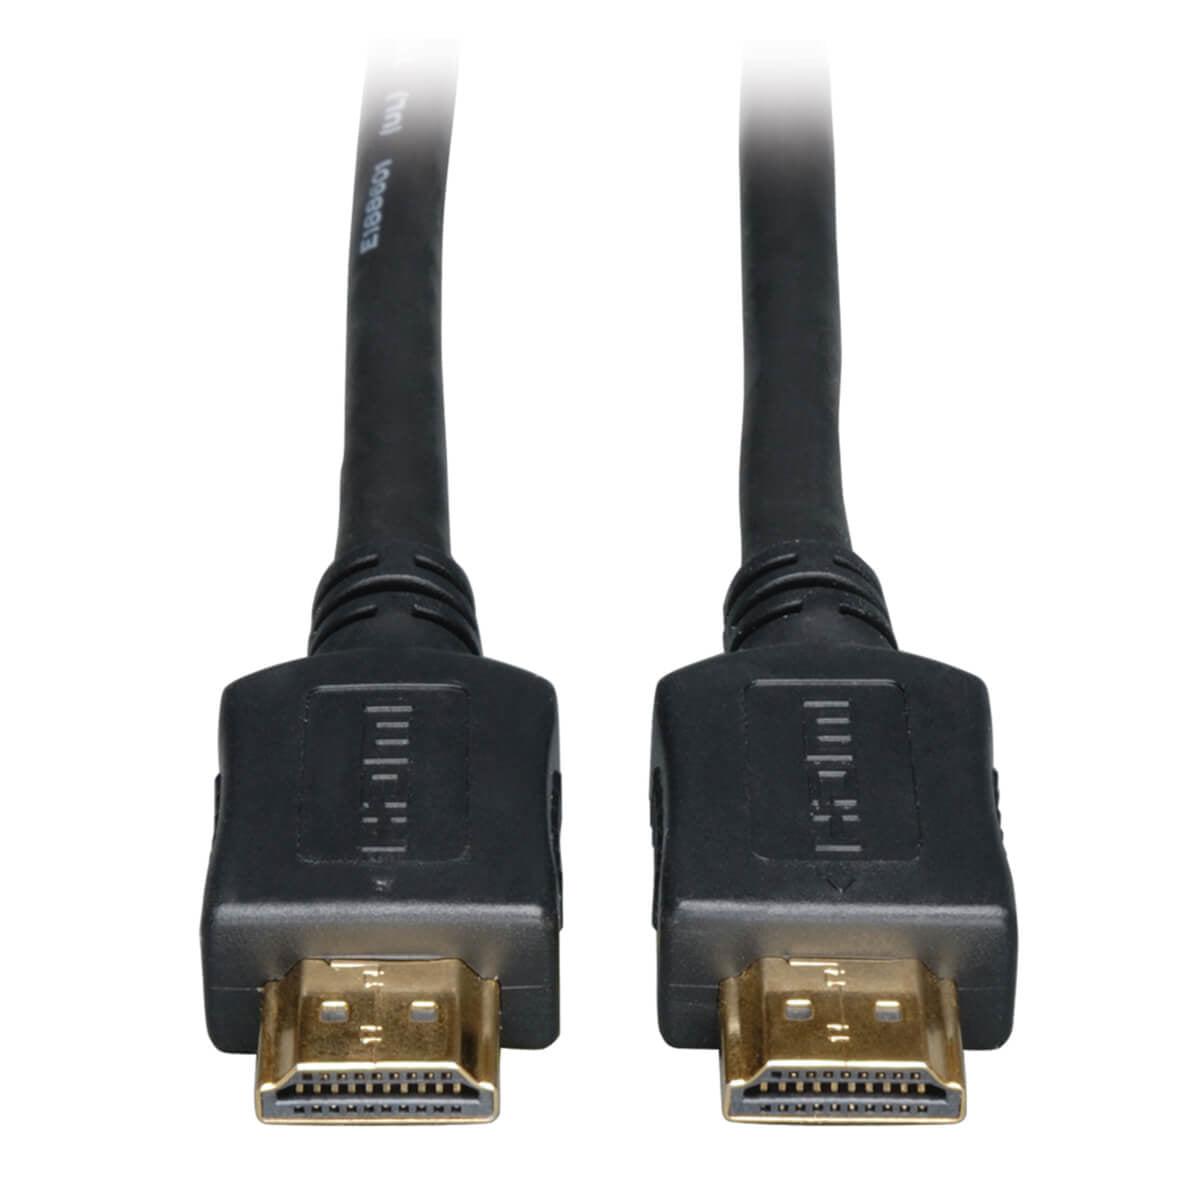 Tripp Lite P568-040-Hd High-Speed Hdmi Cable With Ethernet (M/M) - 4K, No Signal Booster Needed, Black, 40 Ft.